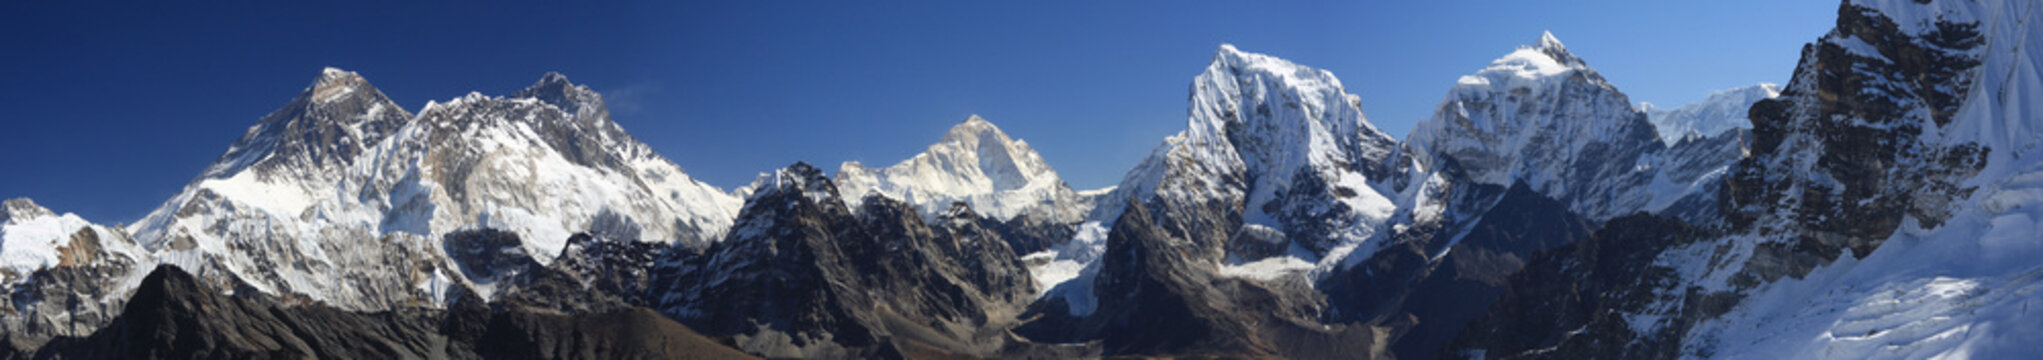 Panorama of Everest from Renjo Pass